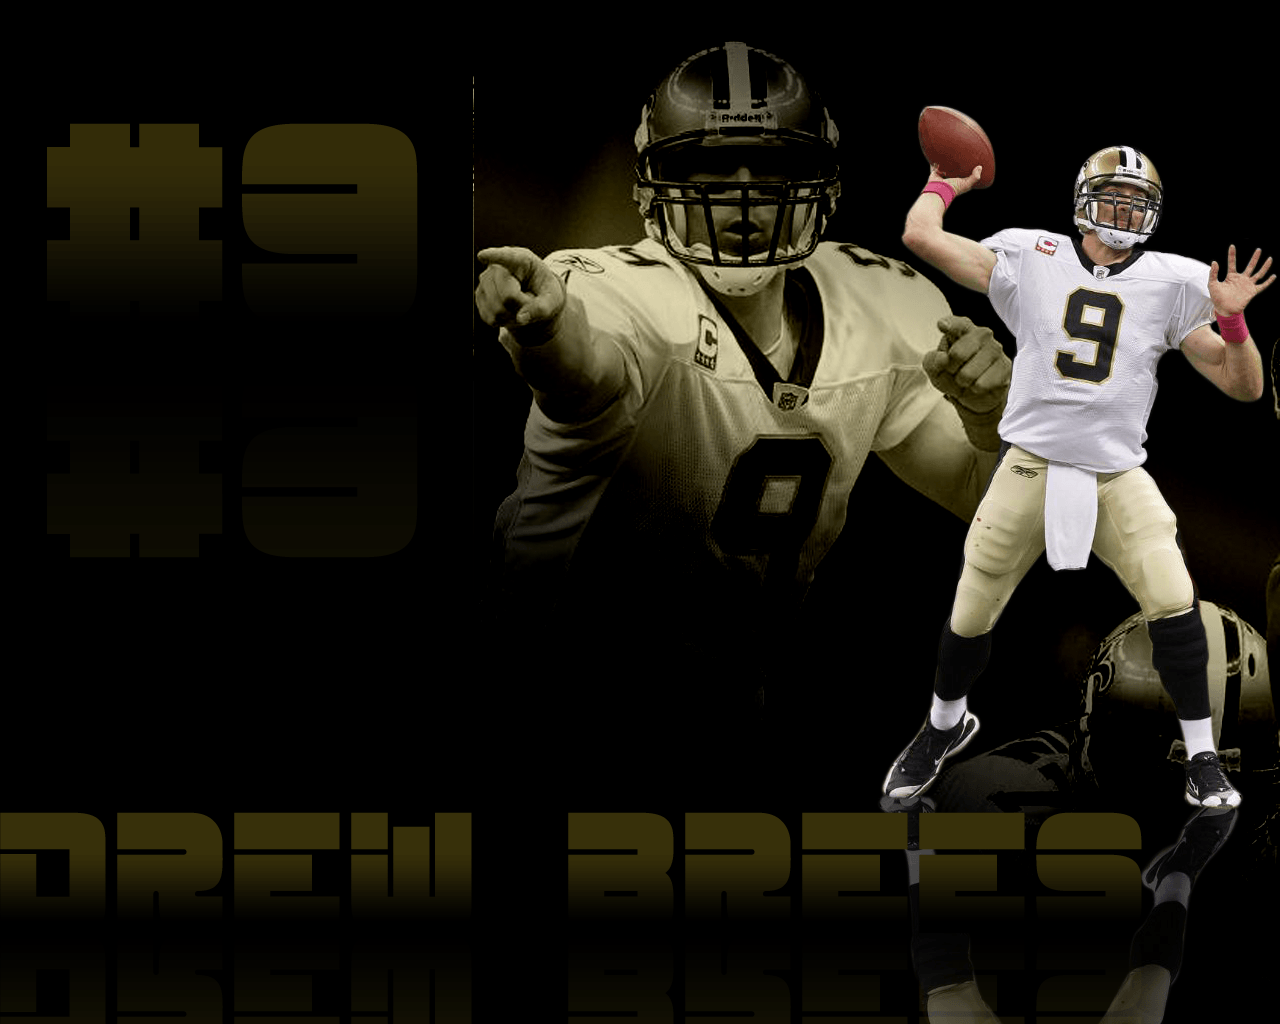 Drew Brees Wallpapers 69 pictures